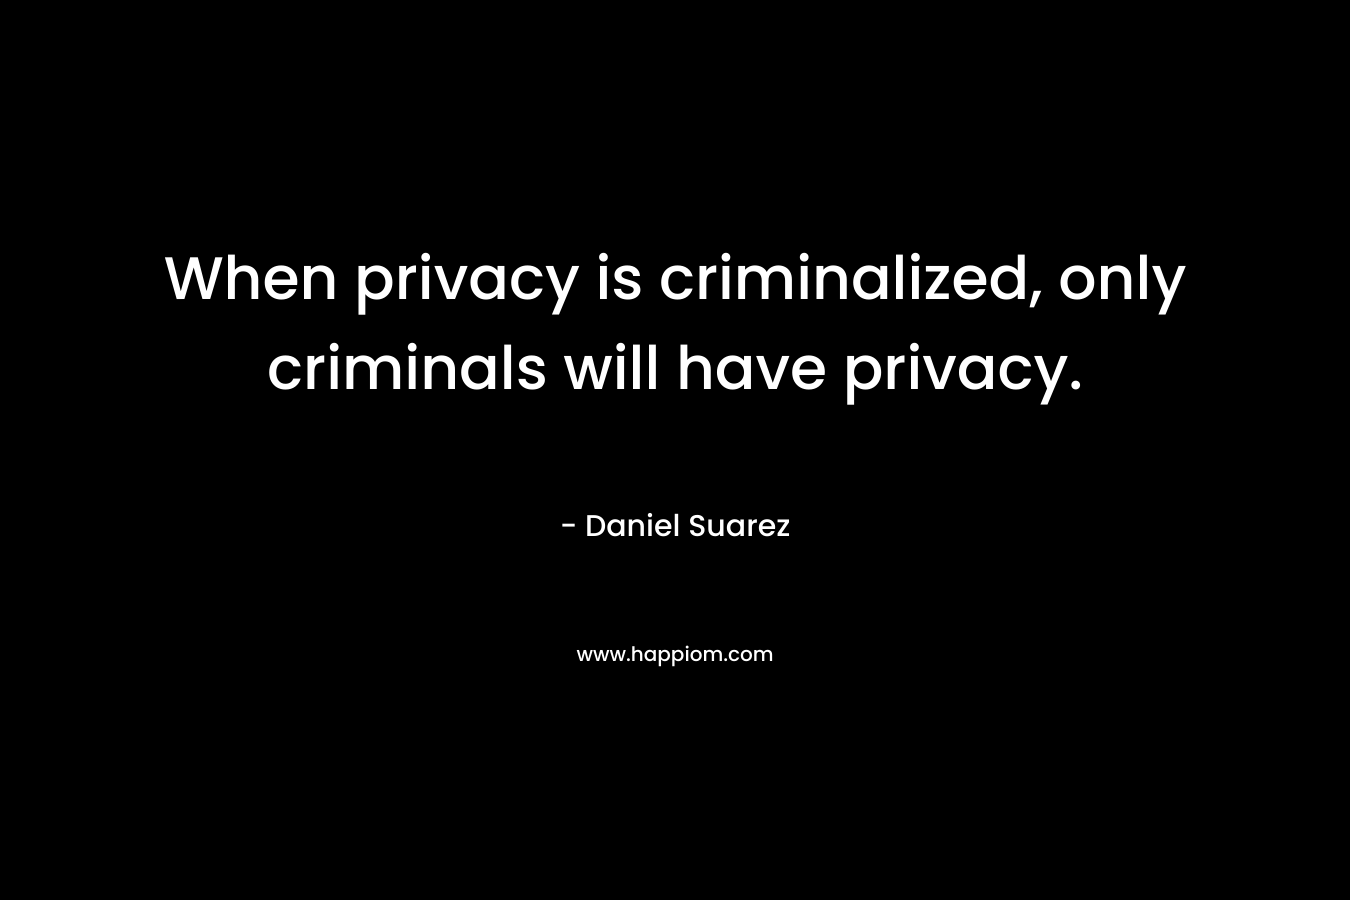 When privacy is criminalized, only criminals will have privacy.